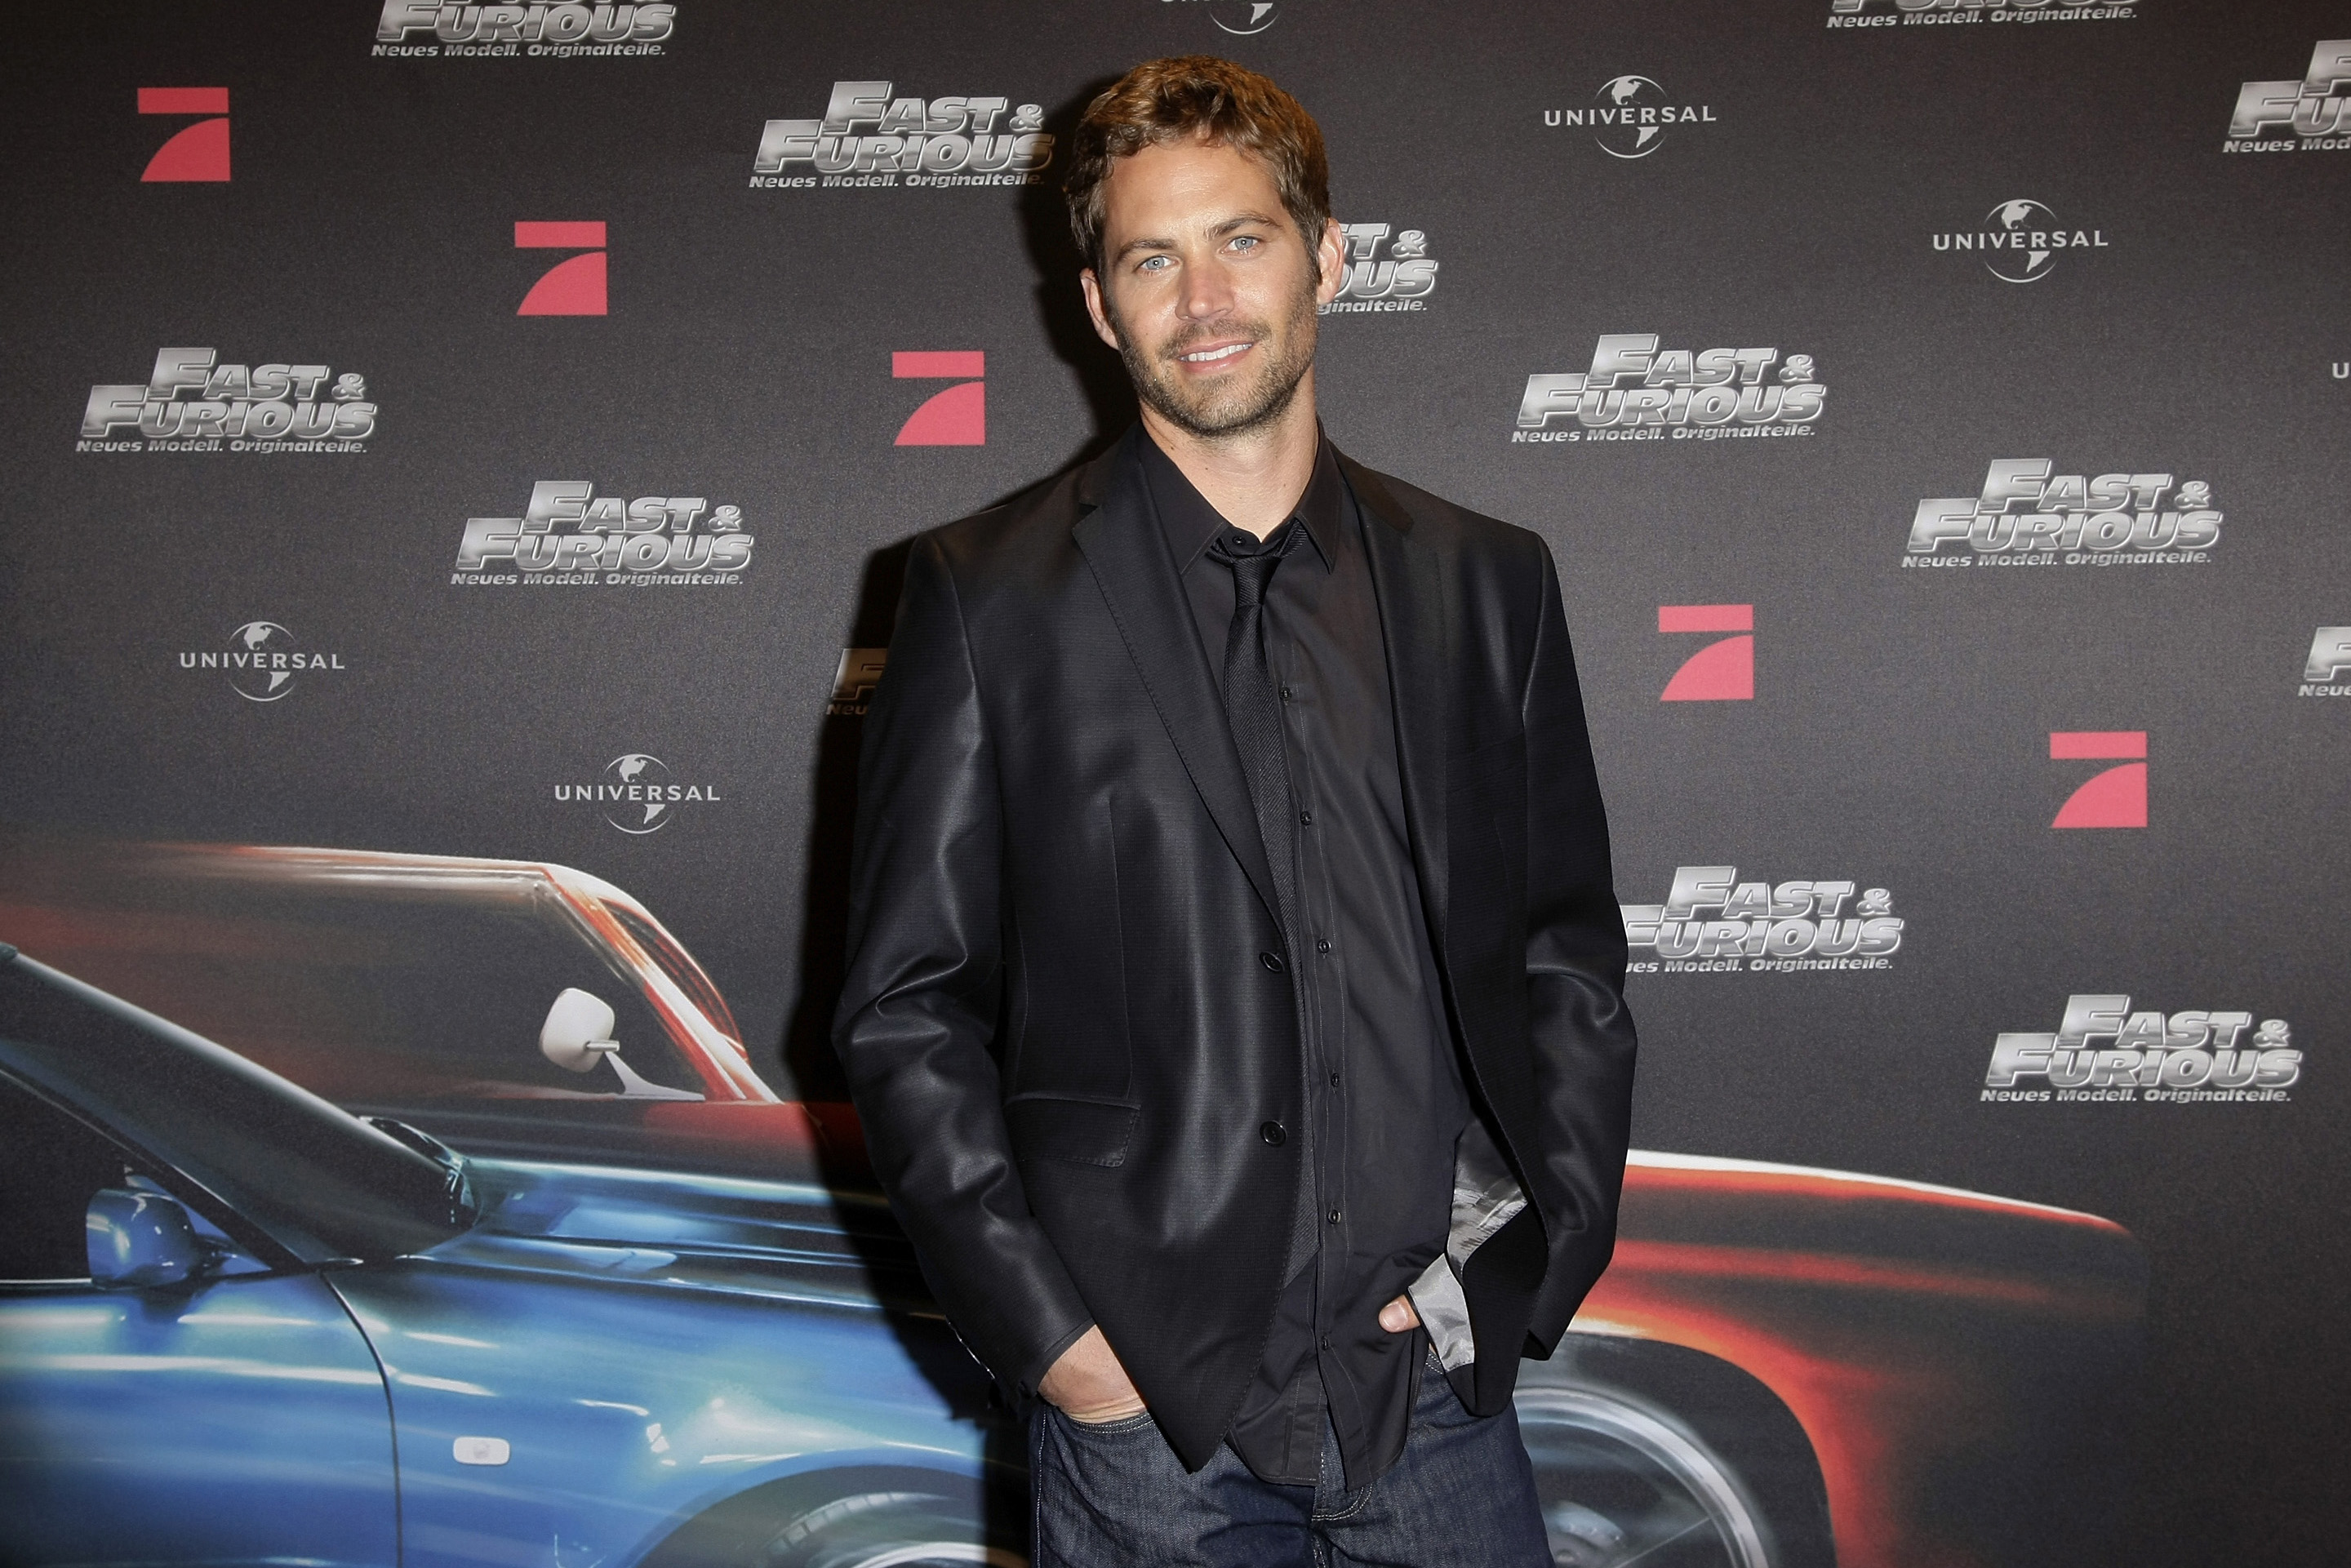 Paul Walker attends the europe premiere of 'The Fast and the Furious 4' at UCI cinema world at Ruhrpark on March 17, 2009 in Bochum, Germany. | Source: Getty Images